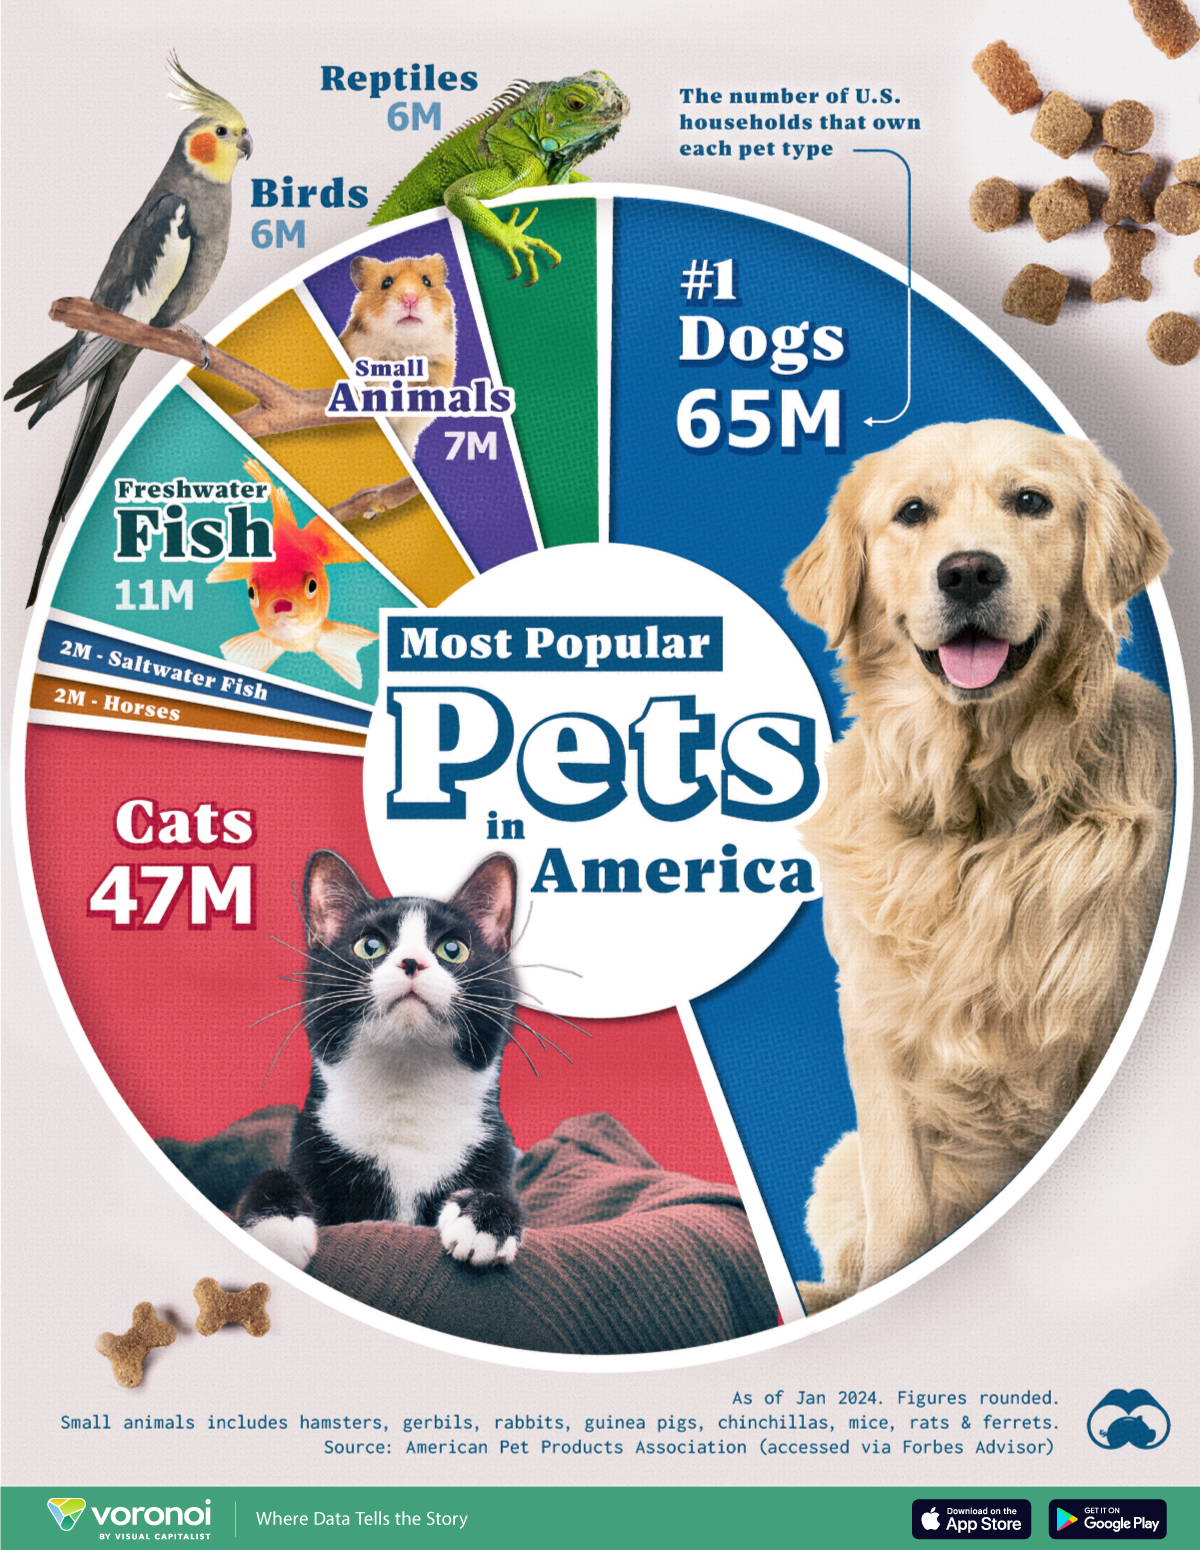 A chart showing the most popular pets in America by the number of households that own the pet.